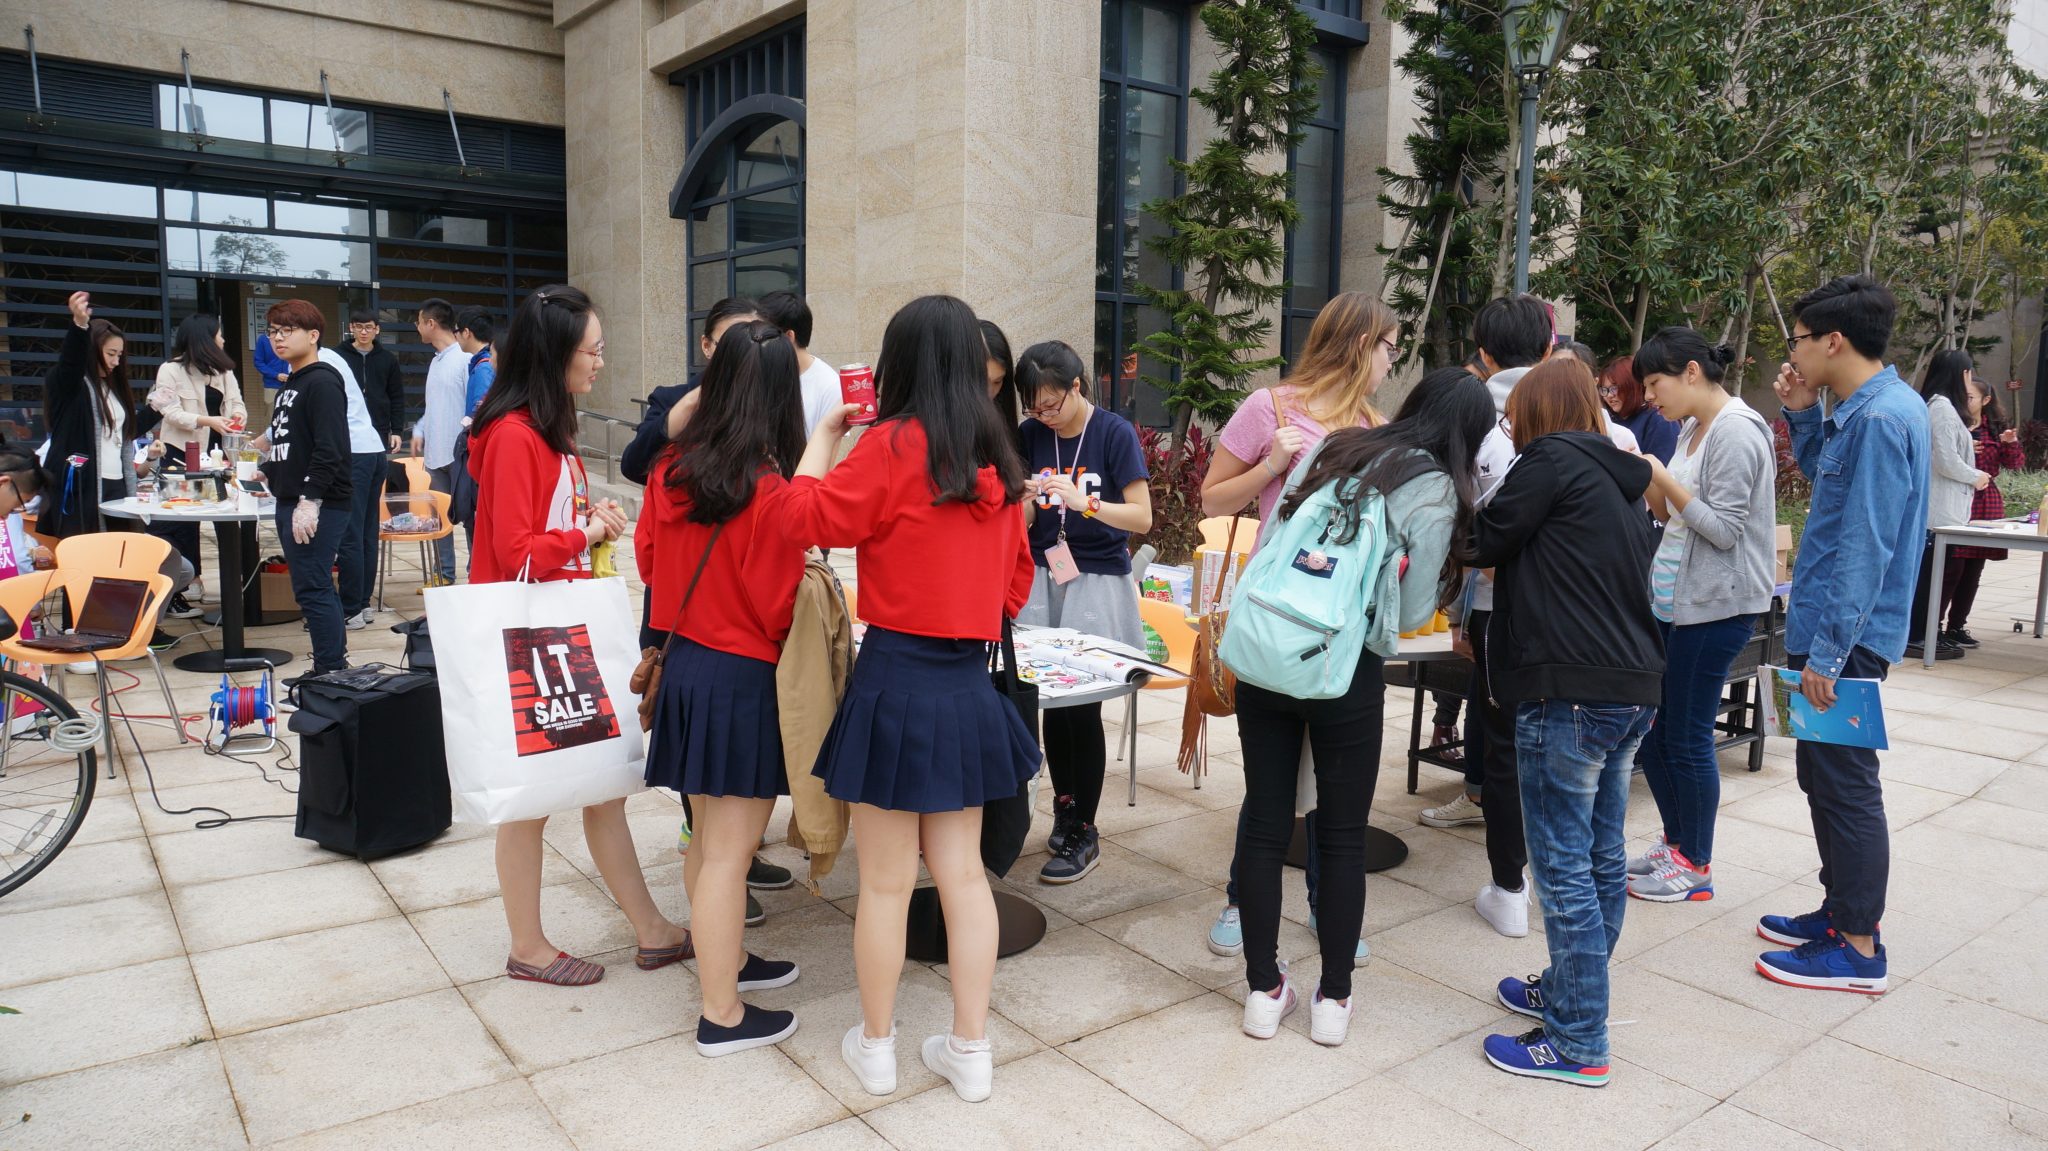 The charity bazaar drew a huge crowd of visitors to the College. 義賣活動吸引大群參觀者到書院。 